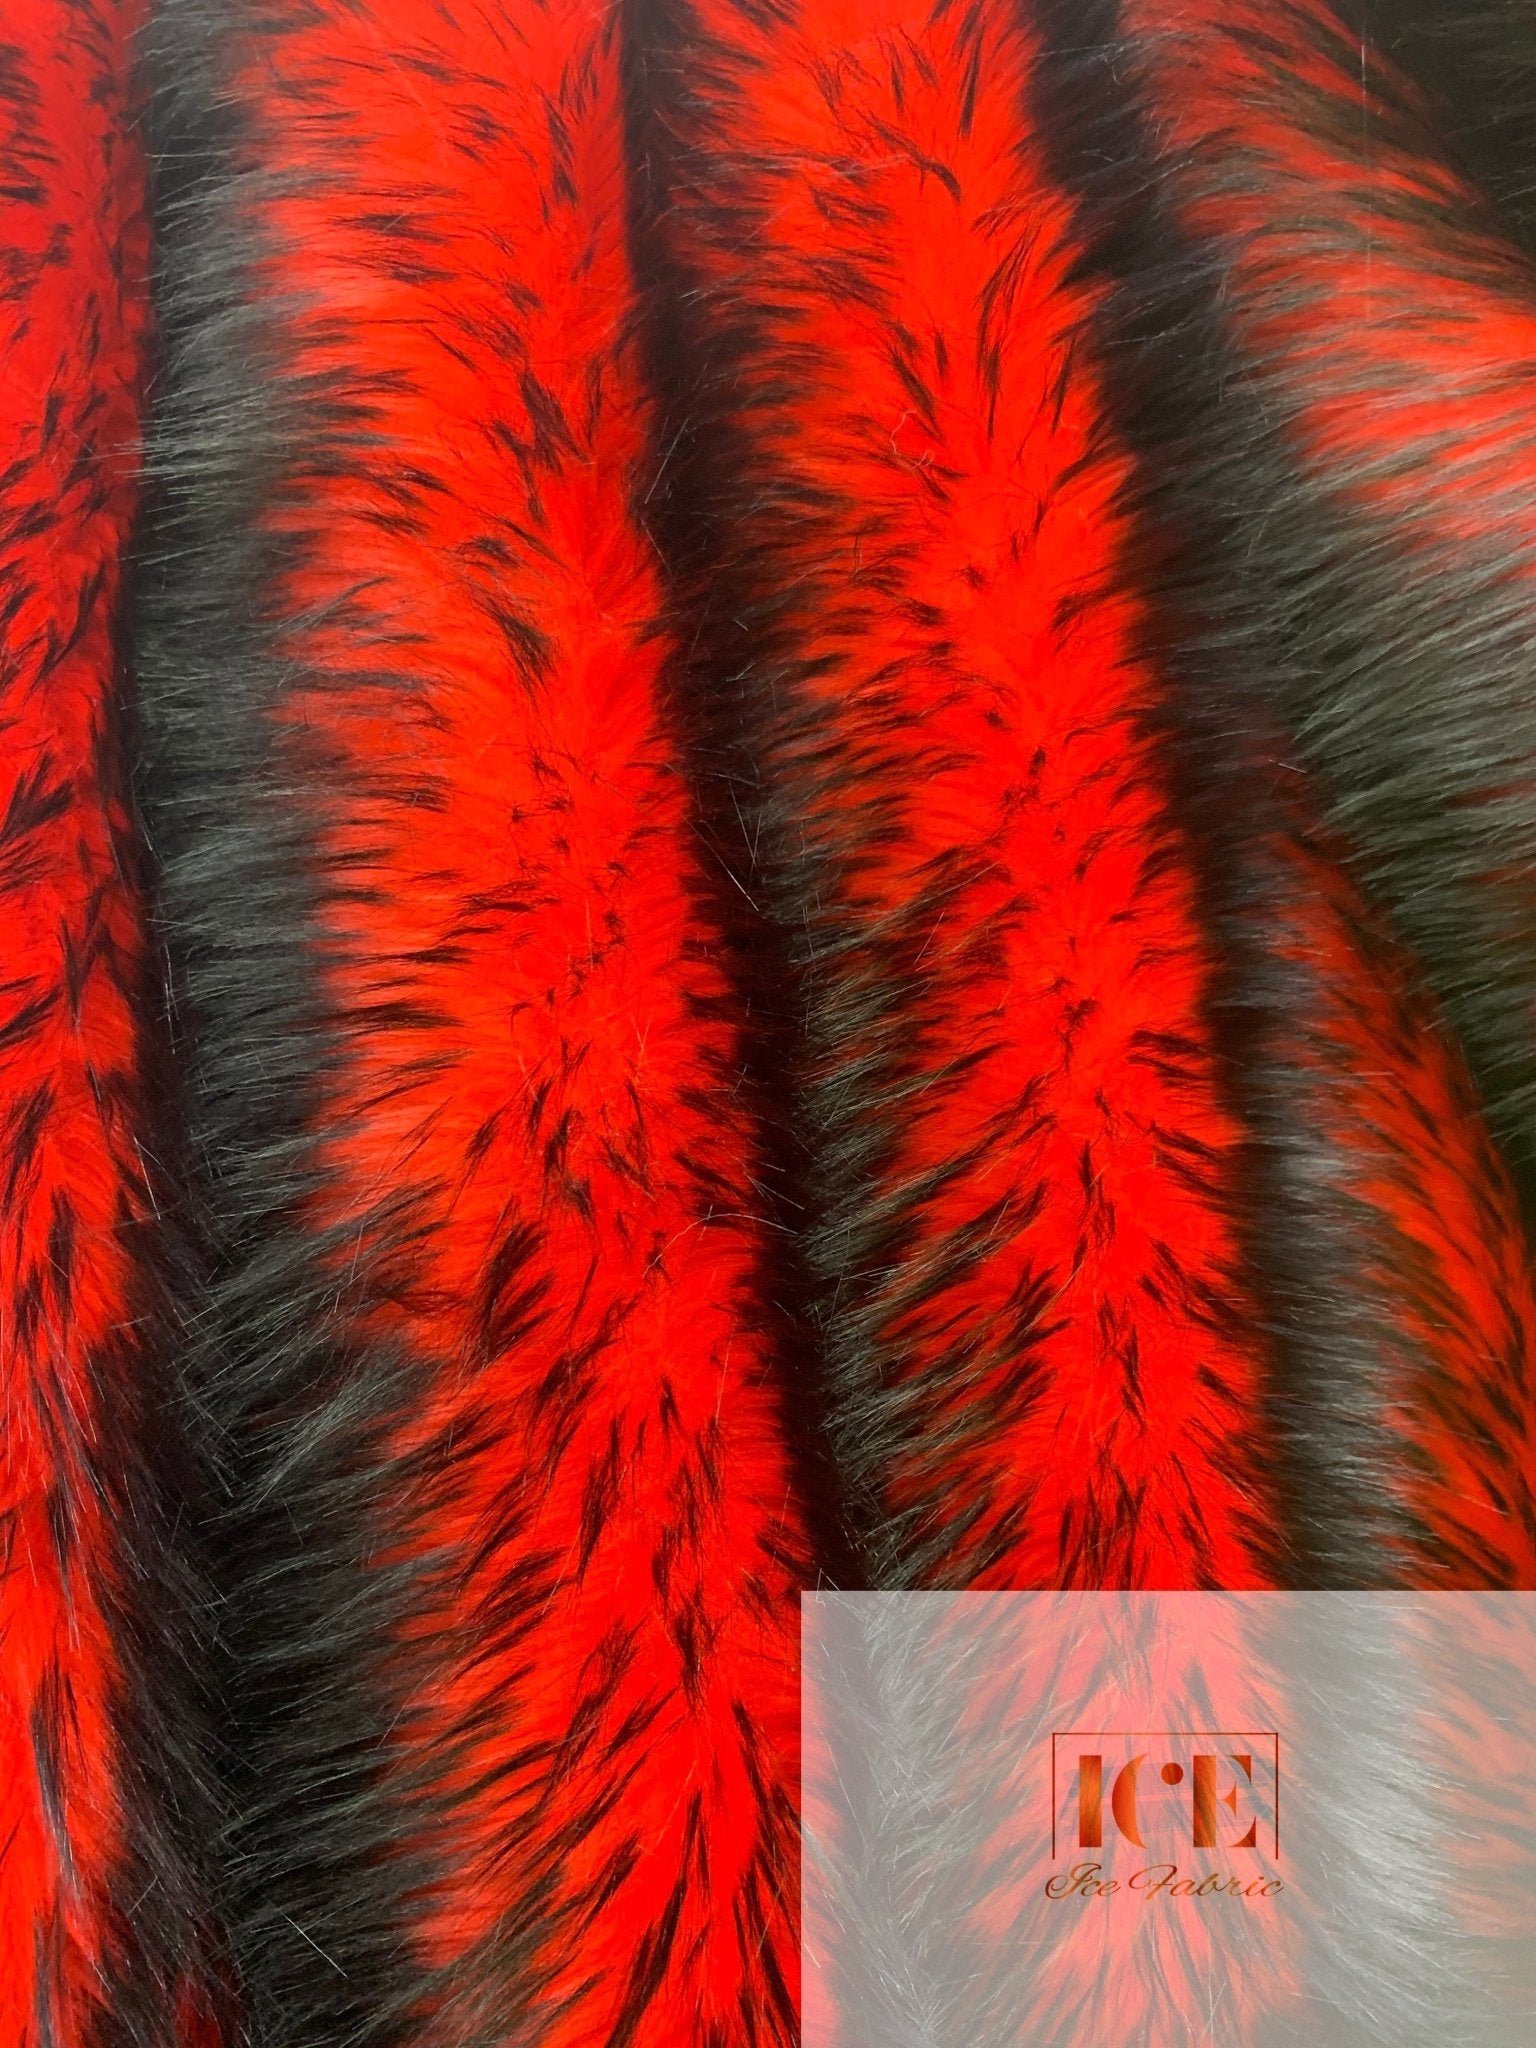 Canadian Fox 2 Tone Shaggy Long Pile Faux Fur Fabric For Blankets, Costumes, Bed SpreadICEFABRICICE FABRICSRed and BlackBy The Yard (60 inches Wide)Canadian Fox 2 Tone Shaggy Long Pile Faux Fur Fabric For Blankets, Costumes, Bed Spread ICEFABRIC Red and Black